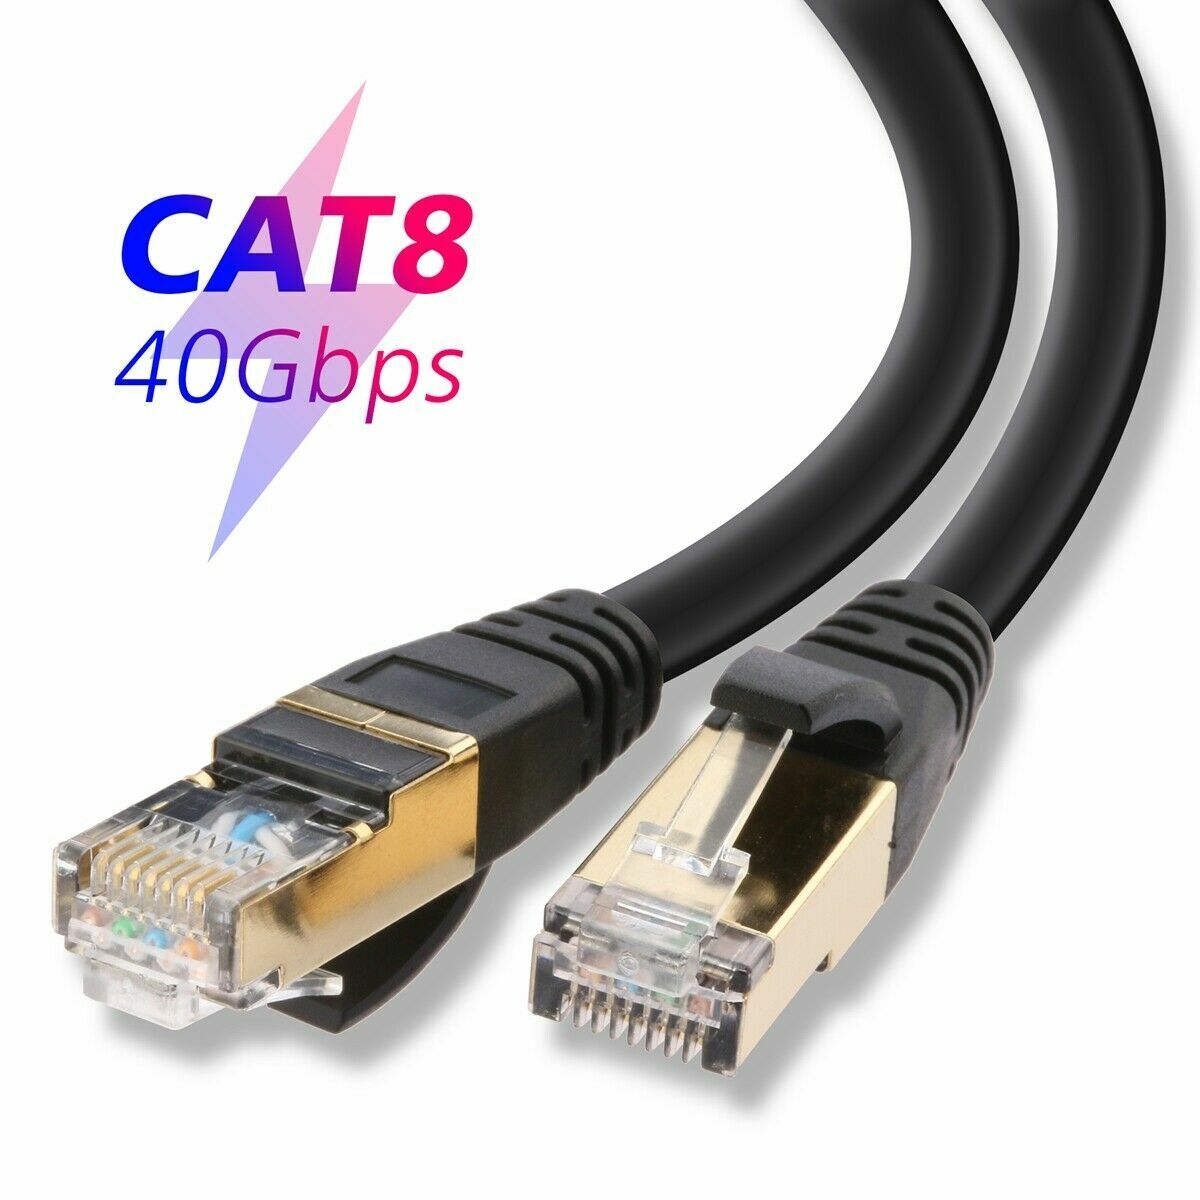 10FT PREMIUM Ethernet Cable CAT 8 Ultra High Speed LAN Patch Cord 